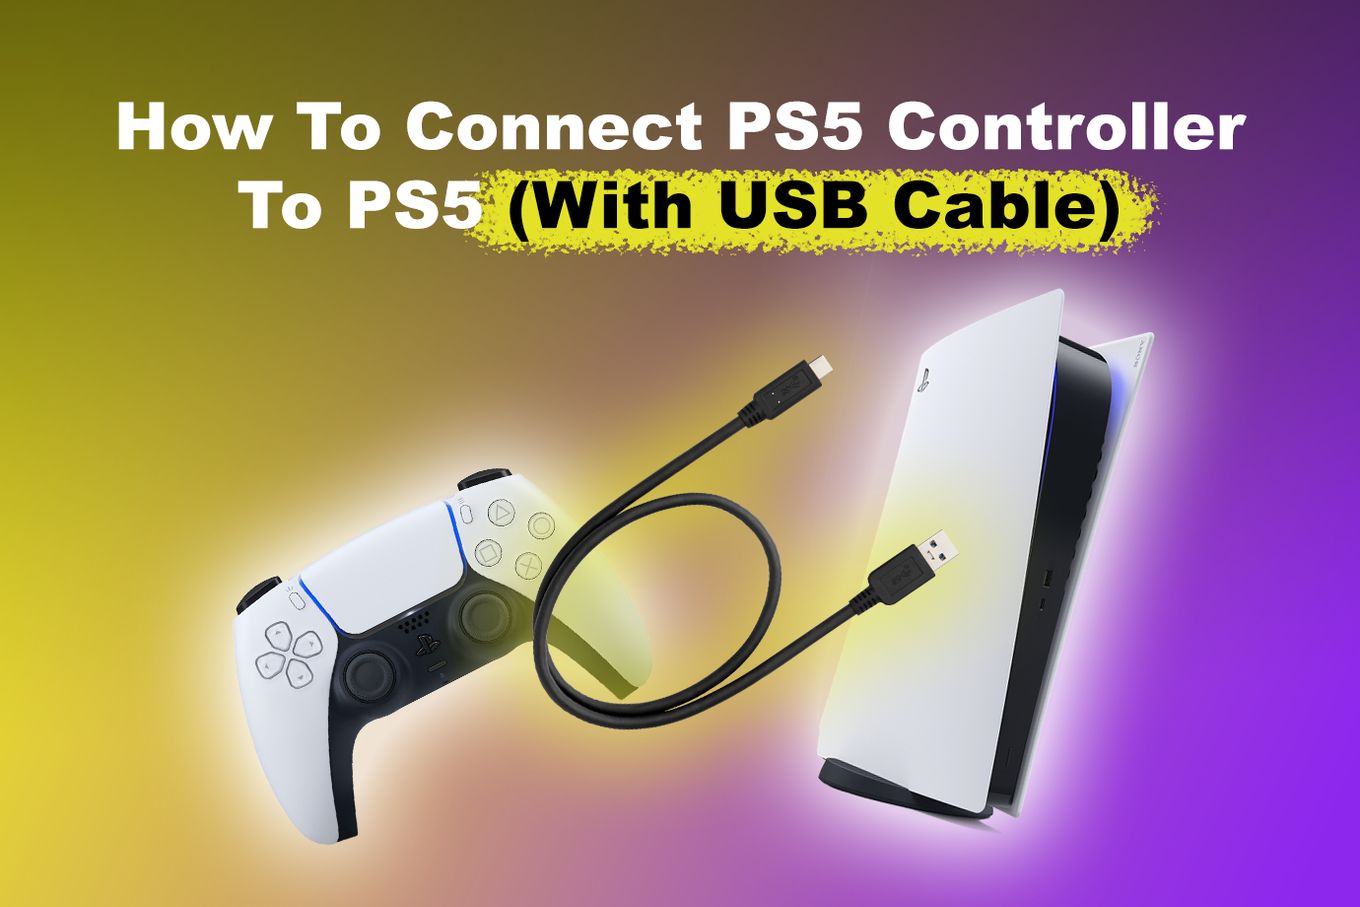 Steps - How To Connect PS5 Controller?